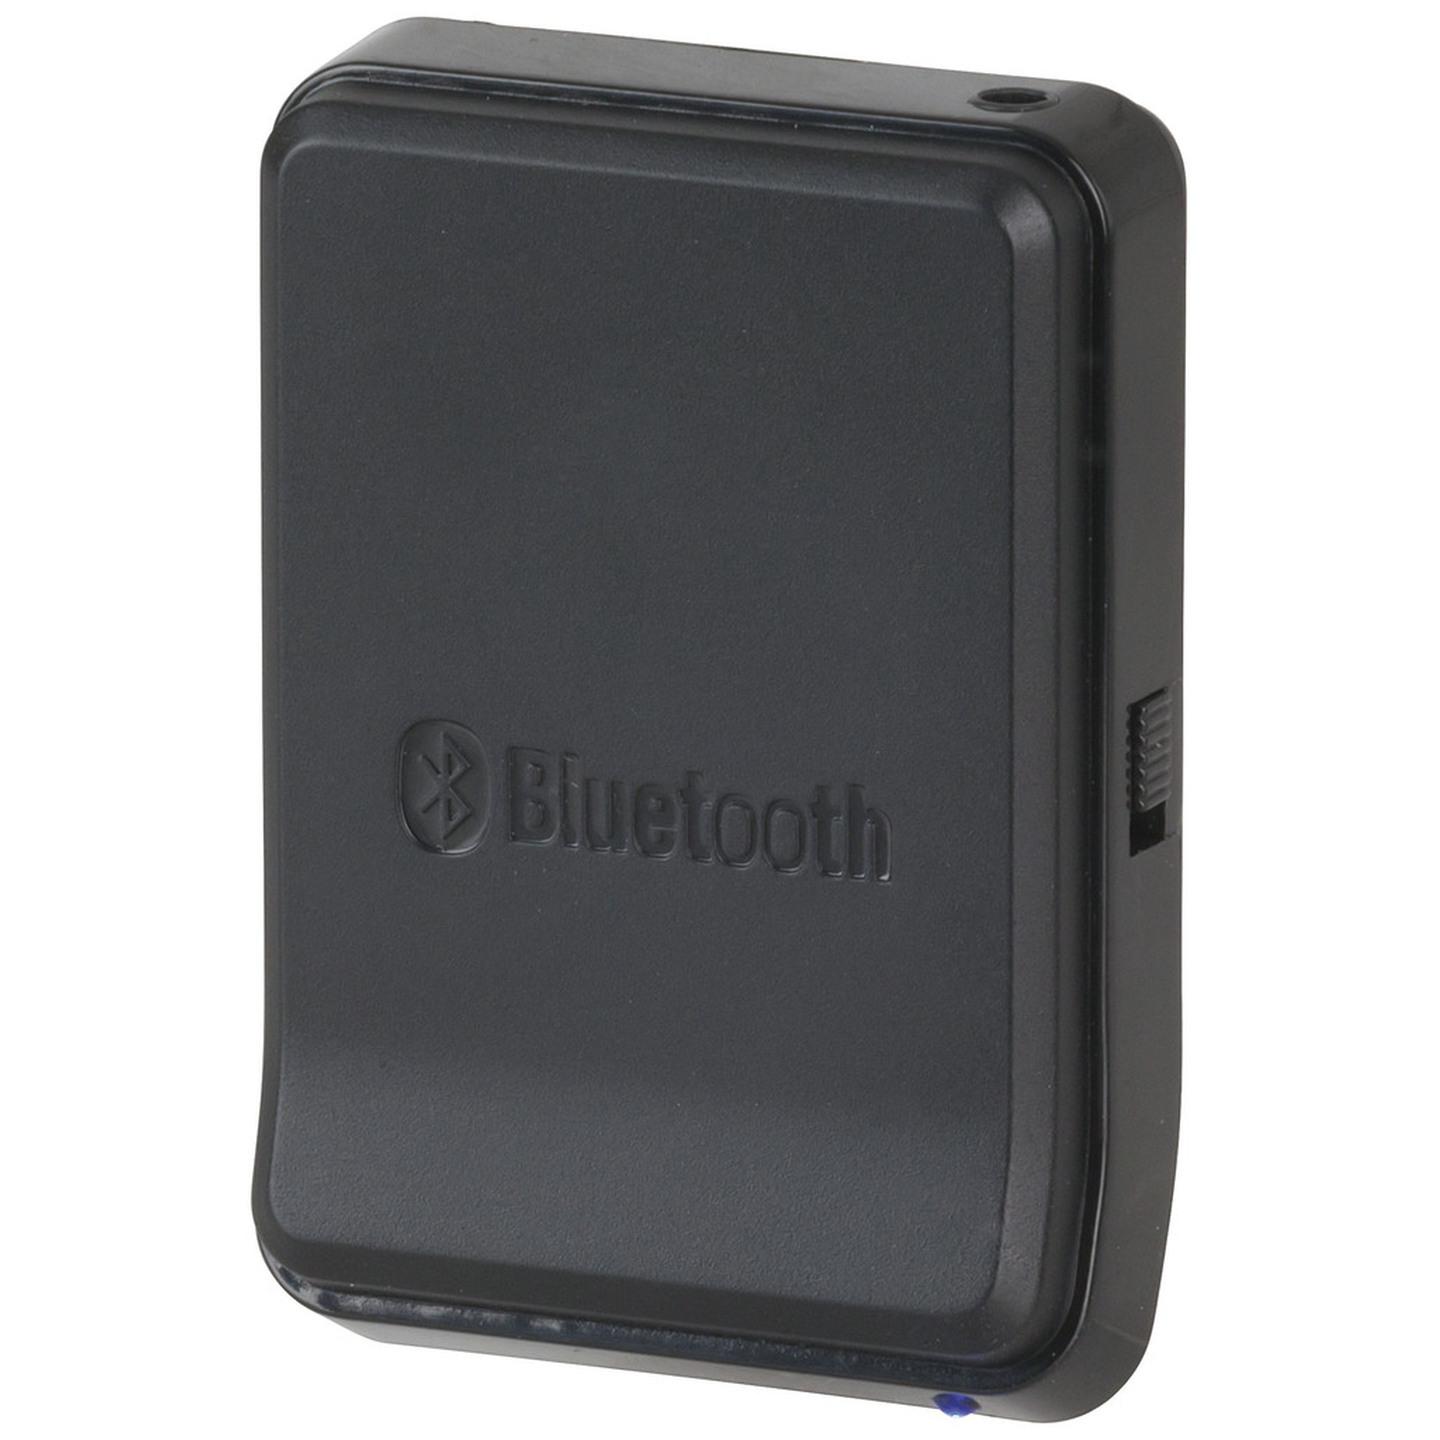 Battery Operated Bluetooth Audio Receiver